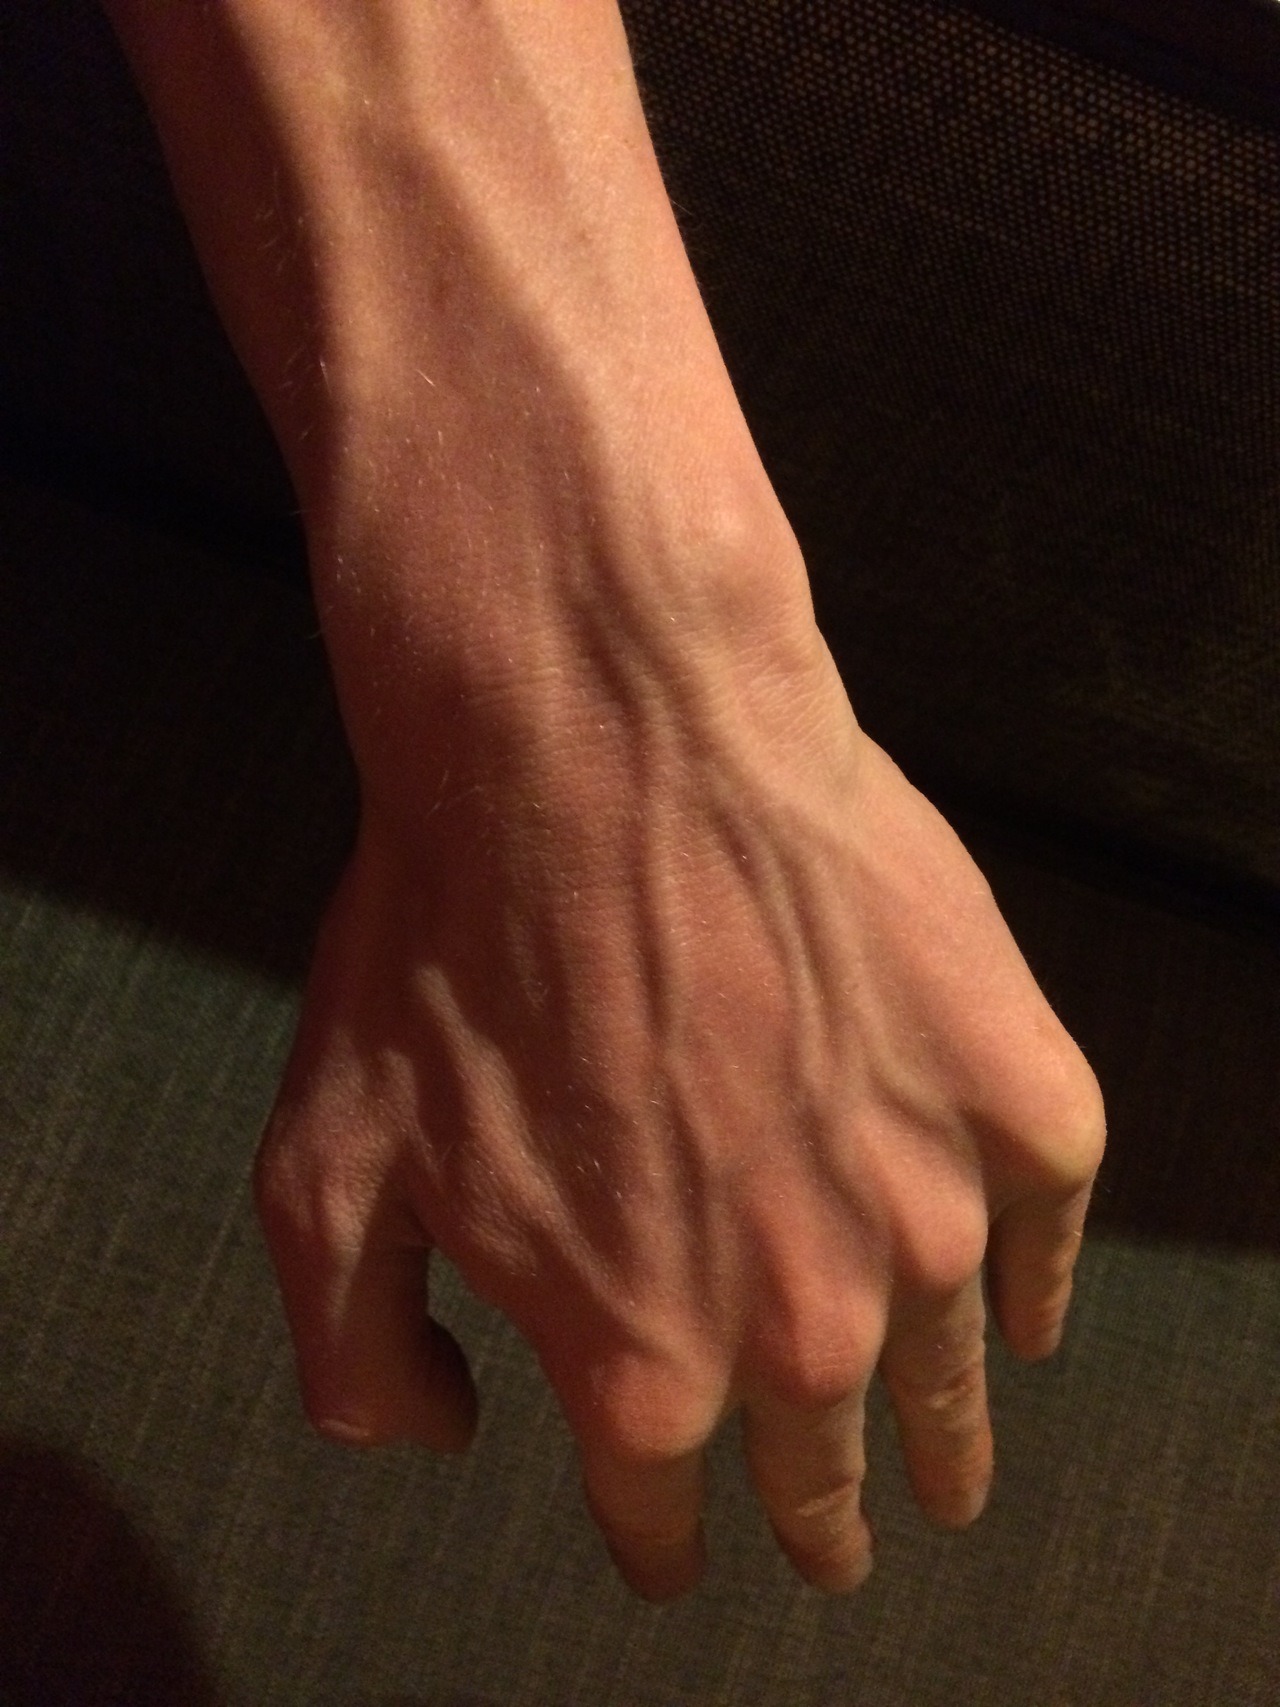 Veiny why arms do people have Veiny Arms: